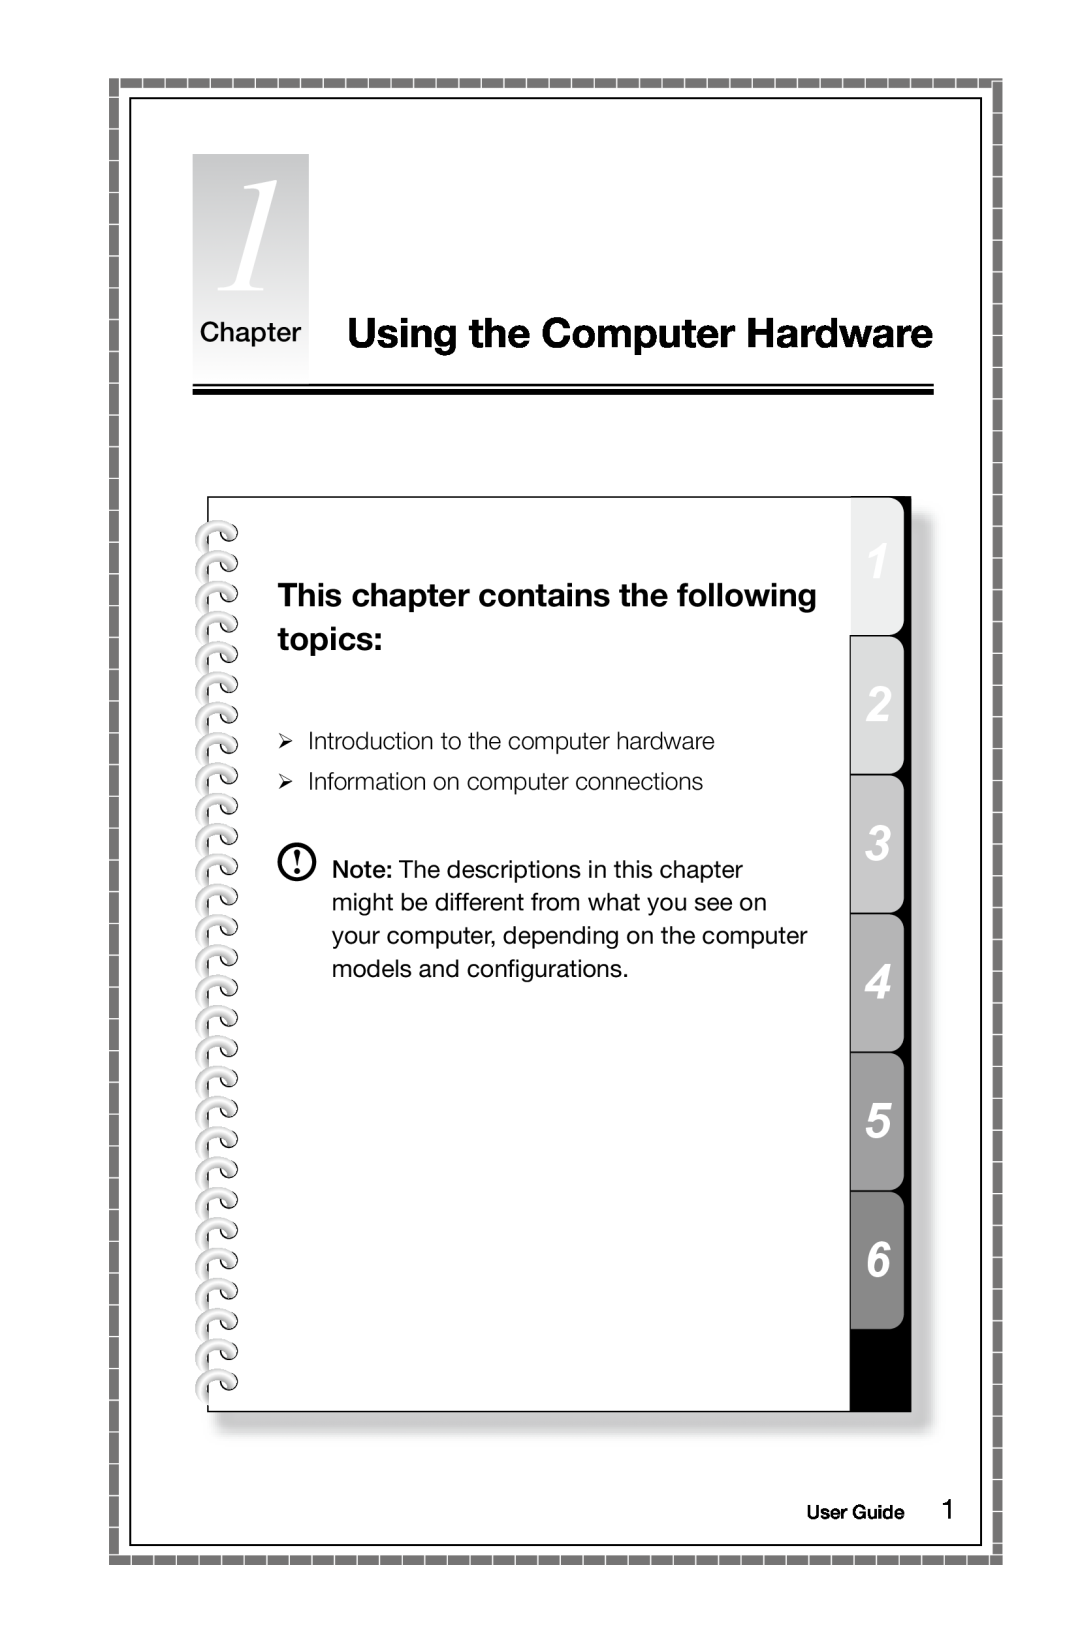 Lenovo 97, 4749 [B545] manual Chapter Using the Computer Hardware, This chapter contains the following topics, User Guide 